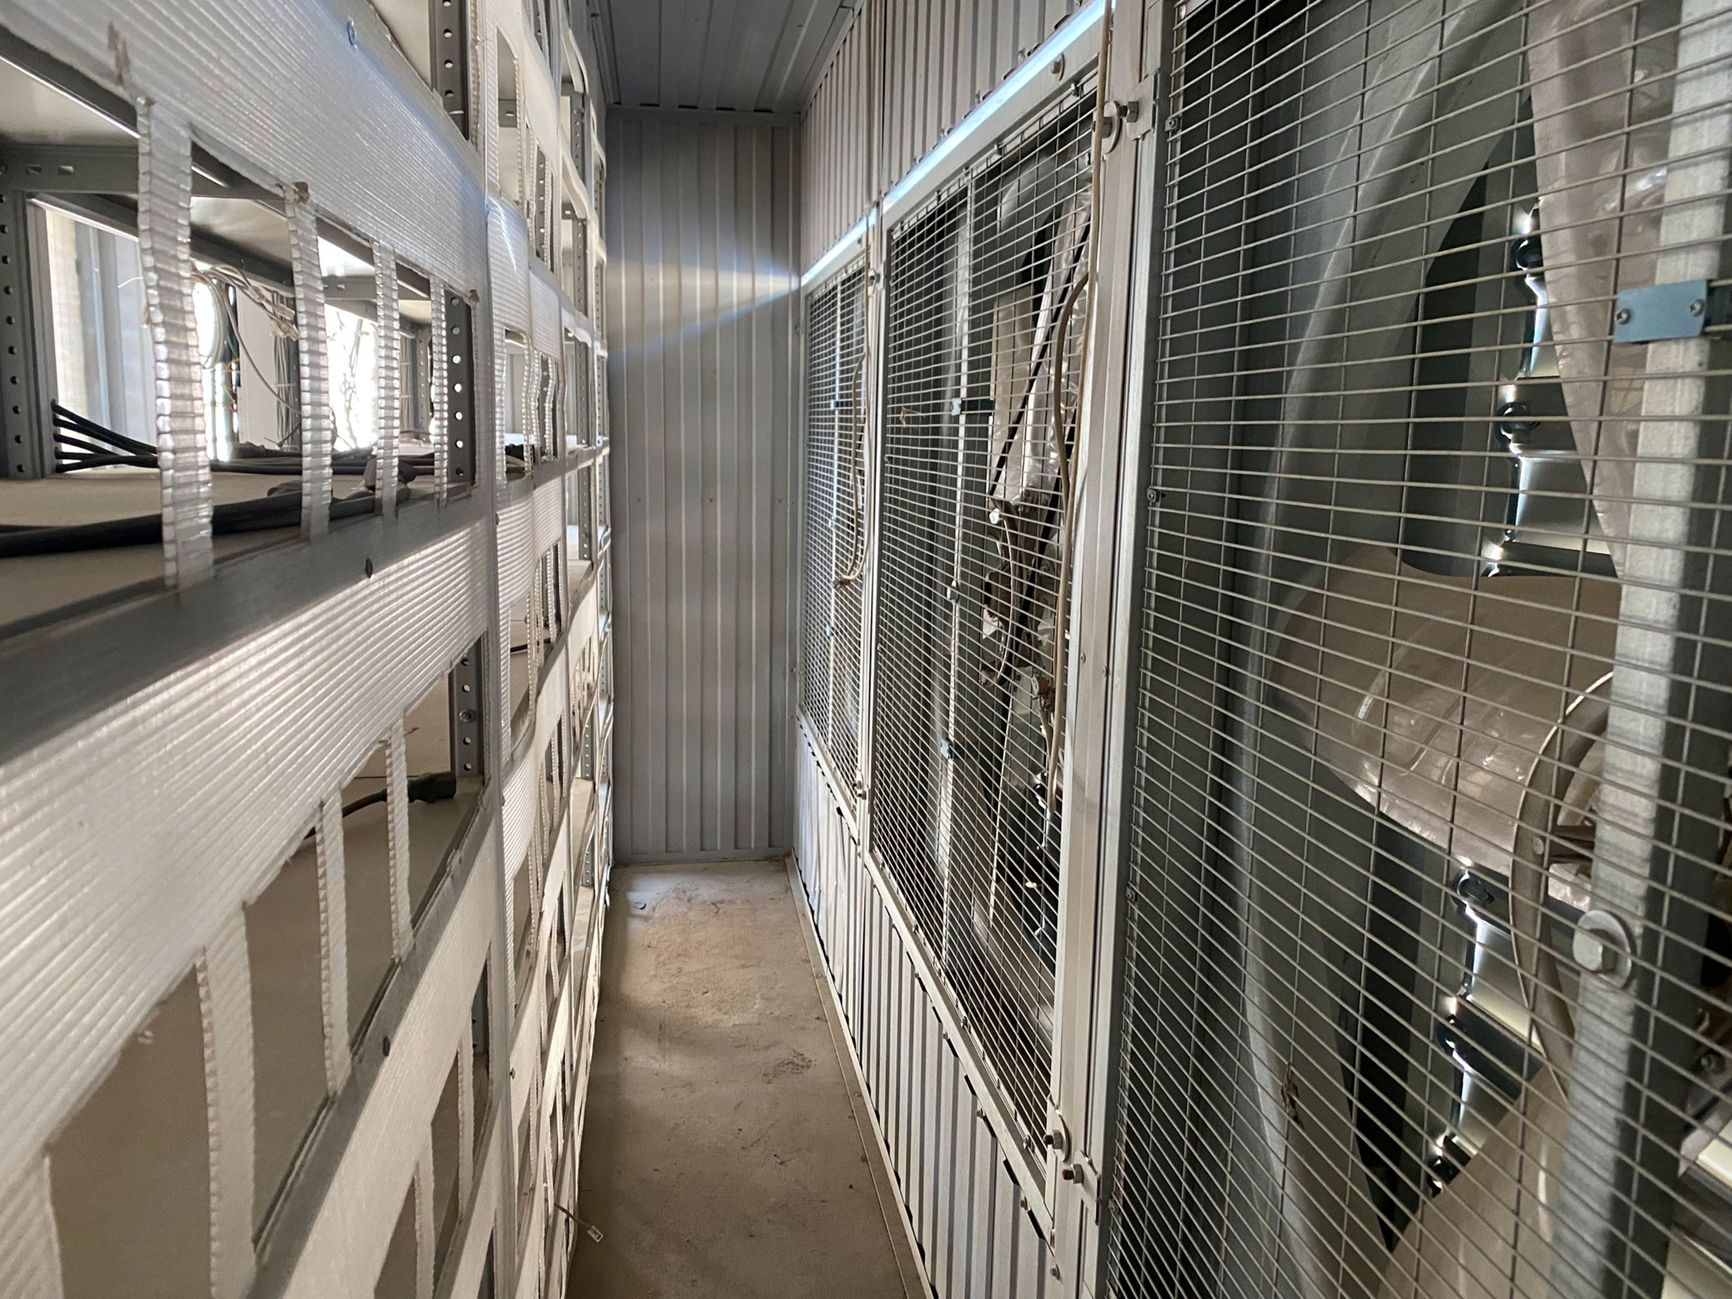 The inside of a shipping container converted into a crypto mining room, with shelves for ASIC miners on the left and fans on the right